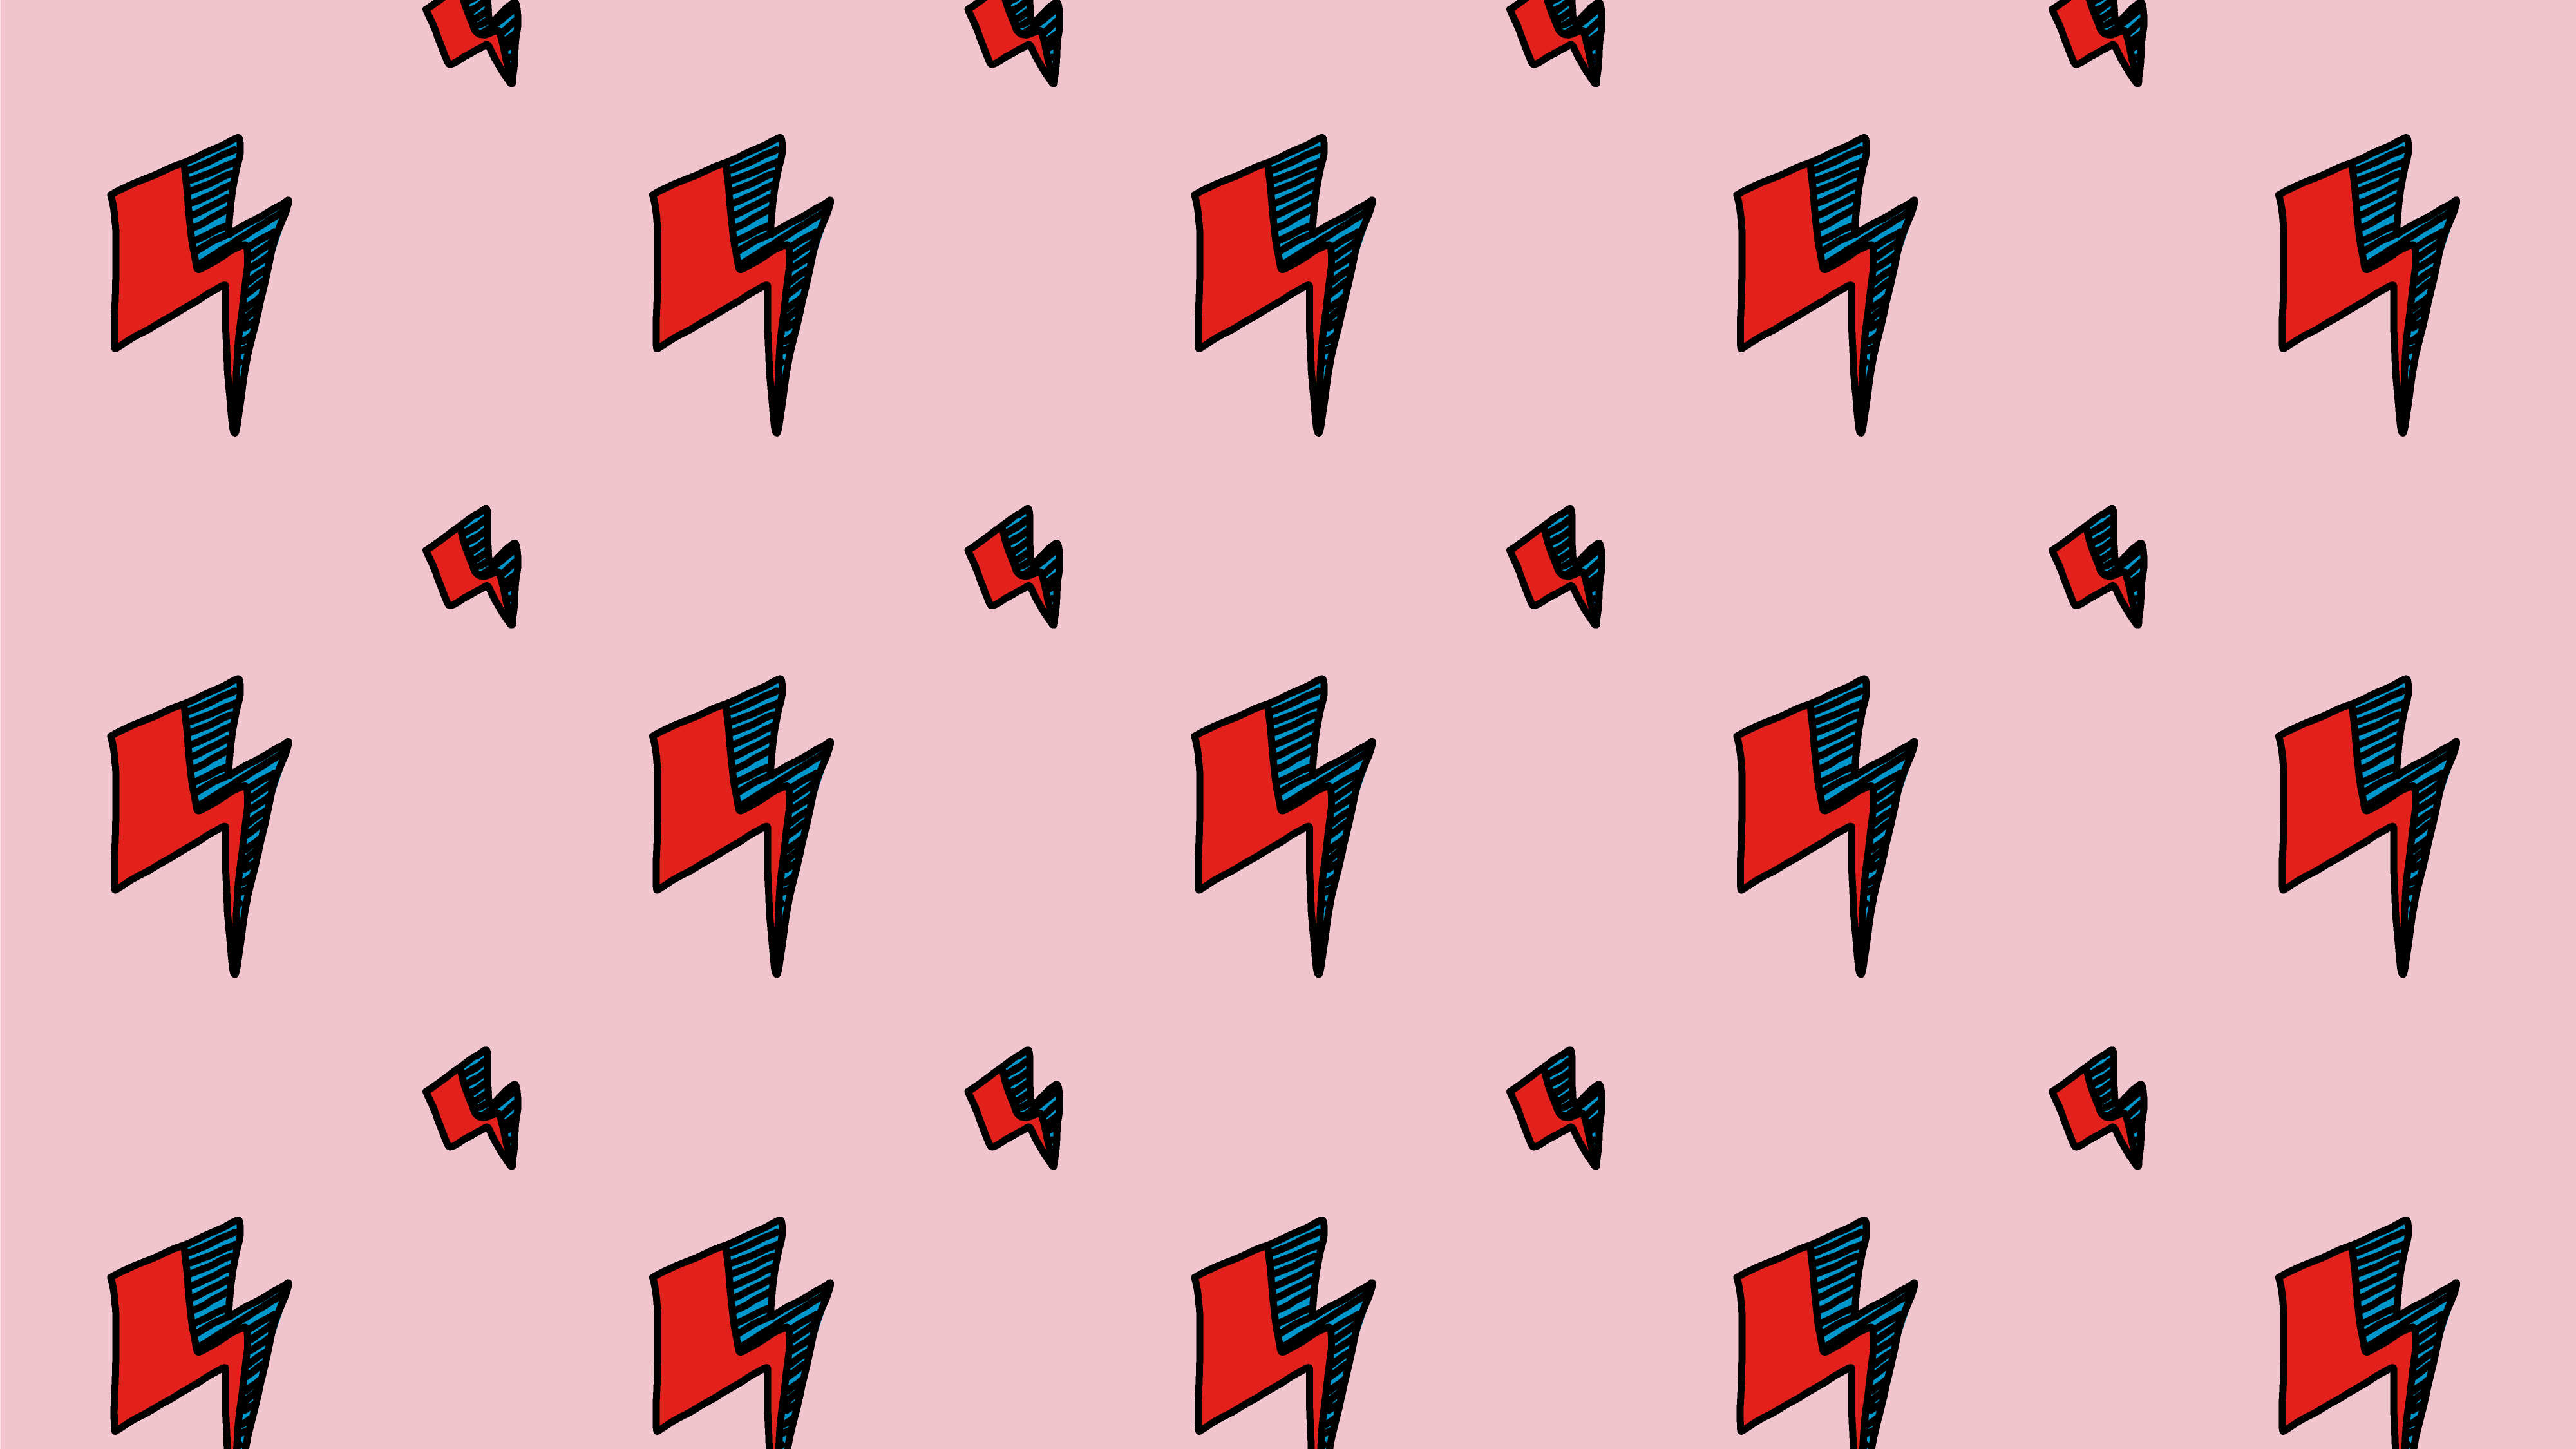 Desktop Wallpaper Free Download // Hallo Spaceboy in Pretty Pink Rose // Stardust Baby David Bowie Pattern Design Collection by Calee Cecconi in Ziggy Stardust Colorway